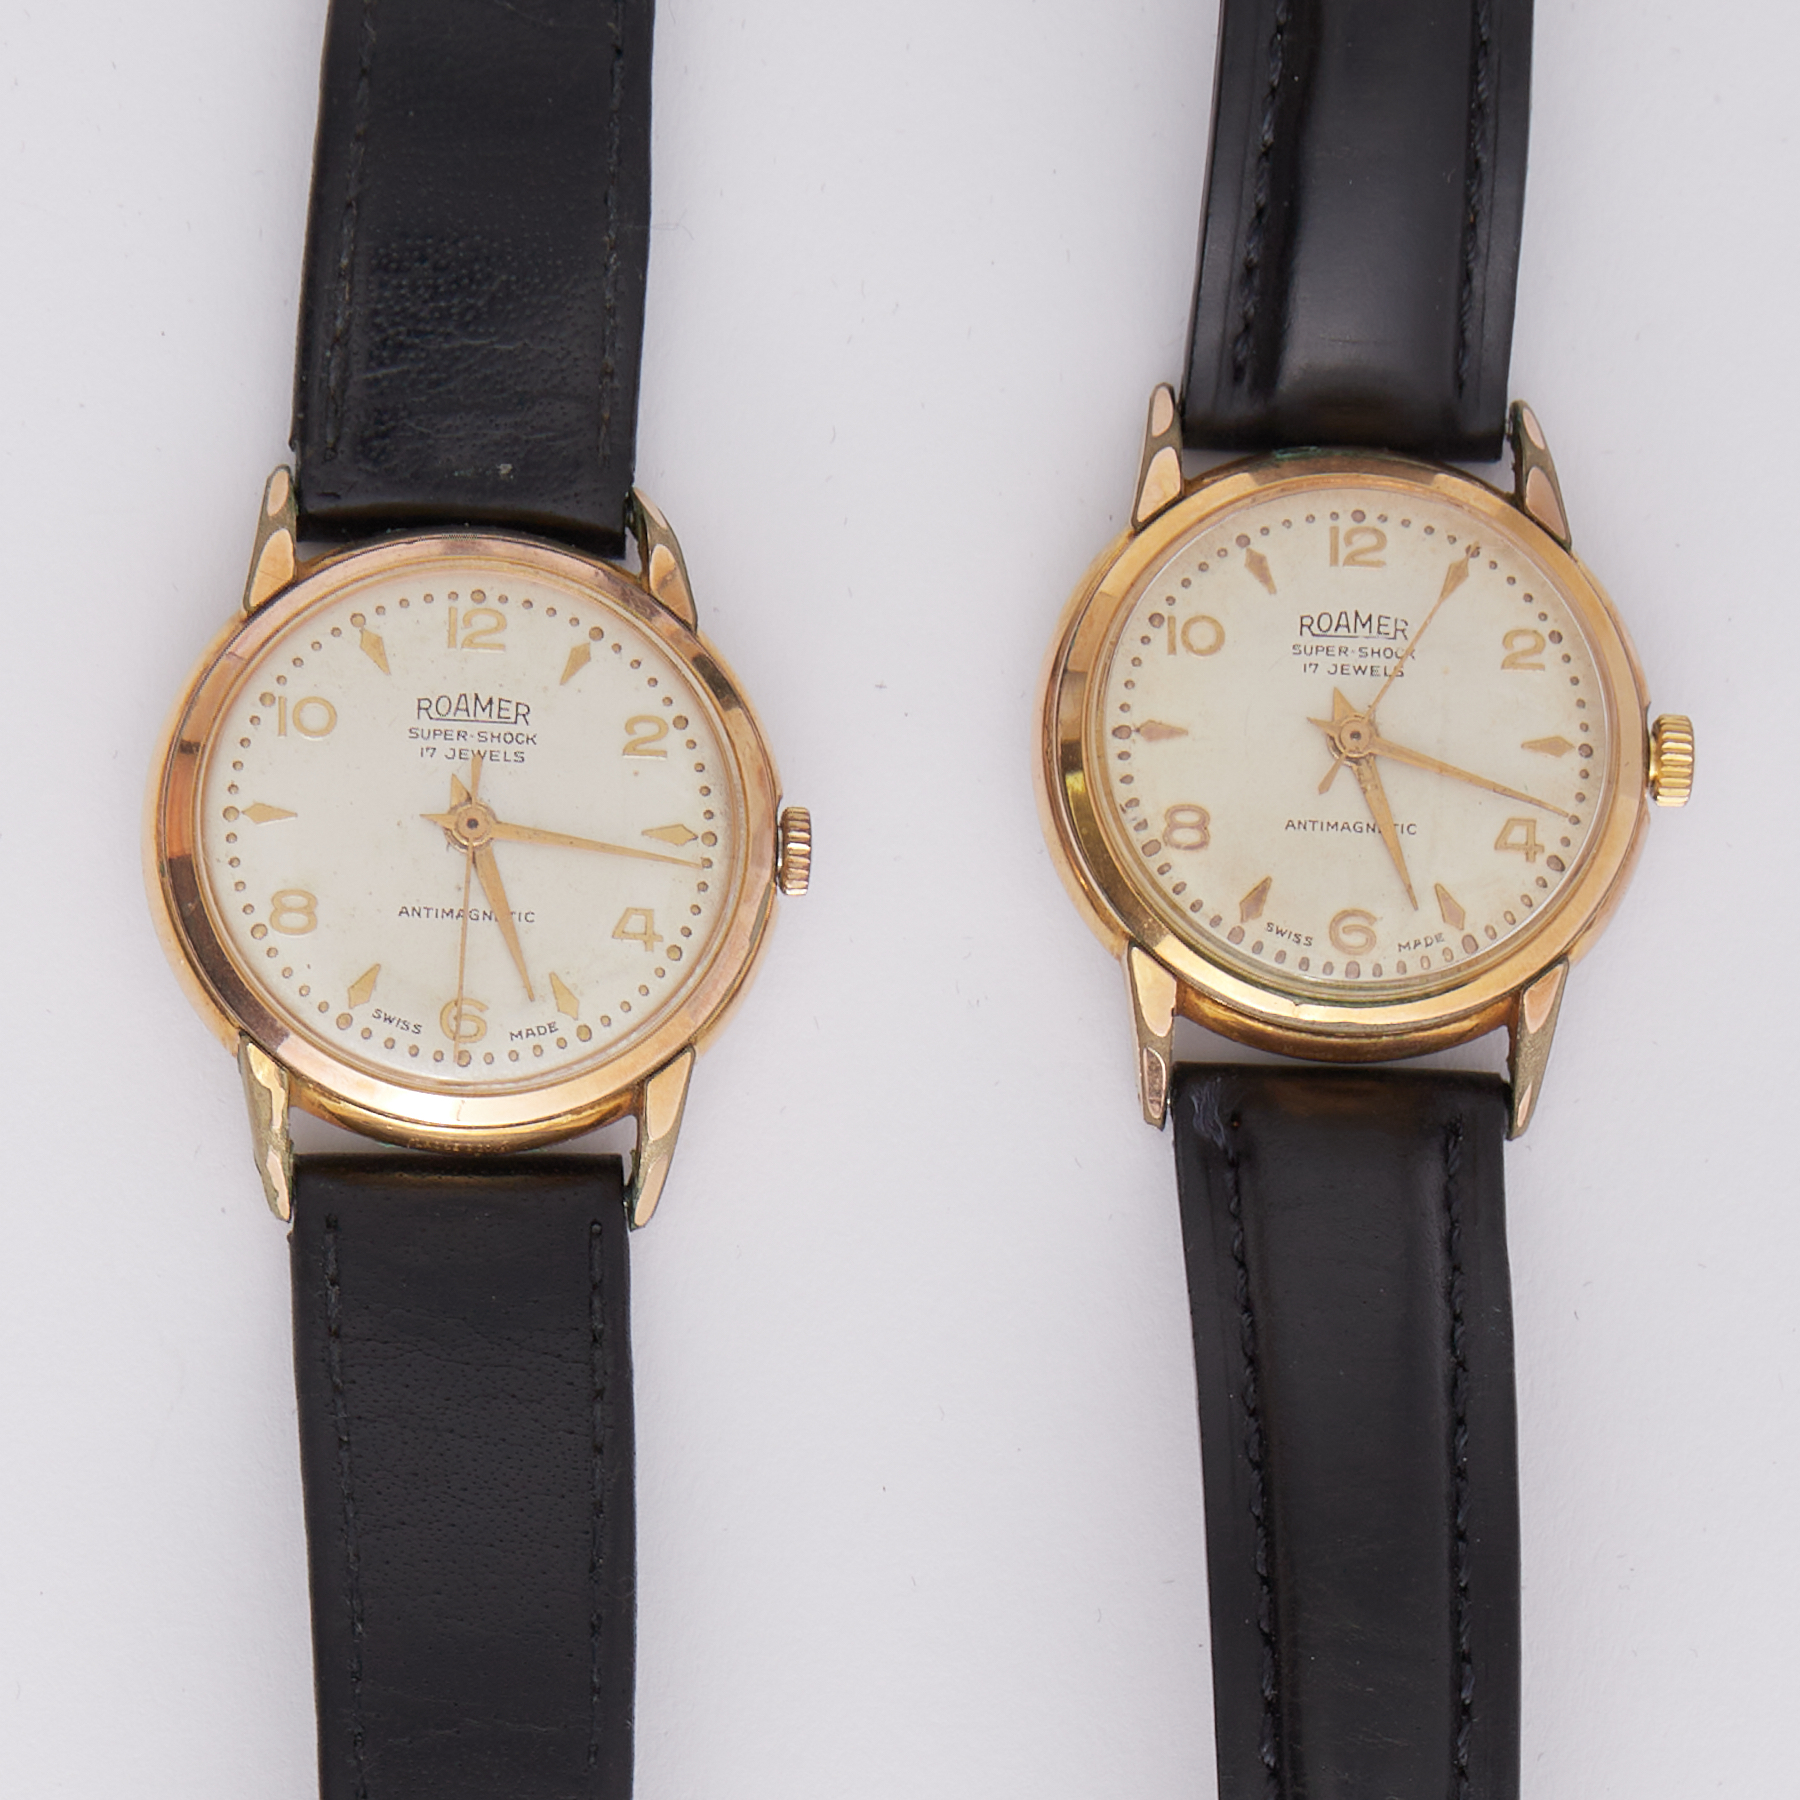 Two gents antimagnetic Roamer Super-Shock 17 Jewel wristwatches, both stamped on